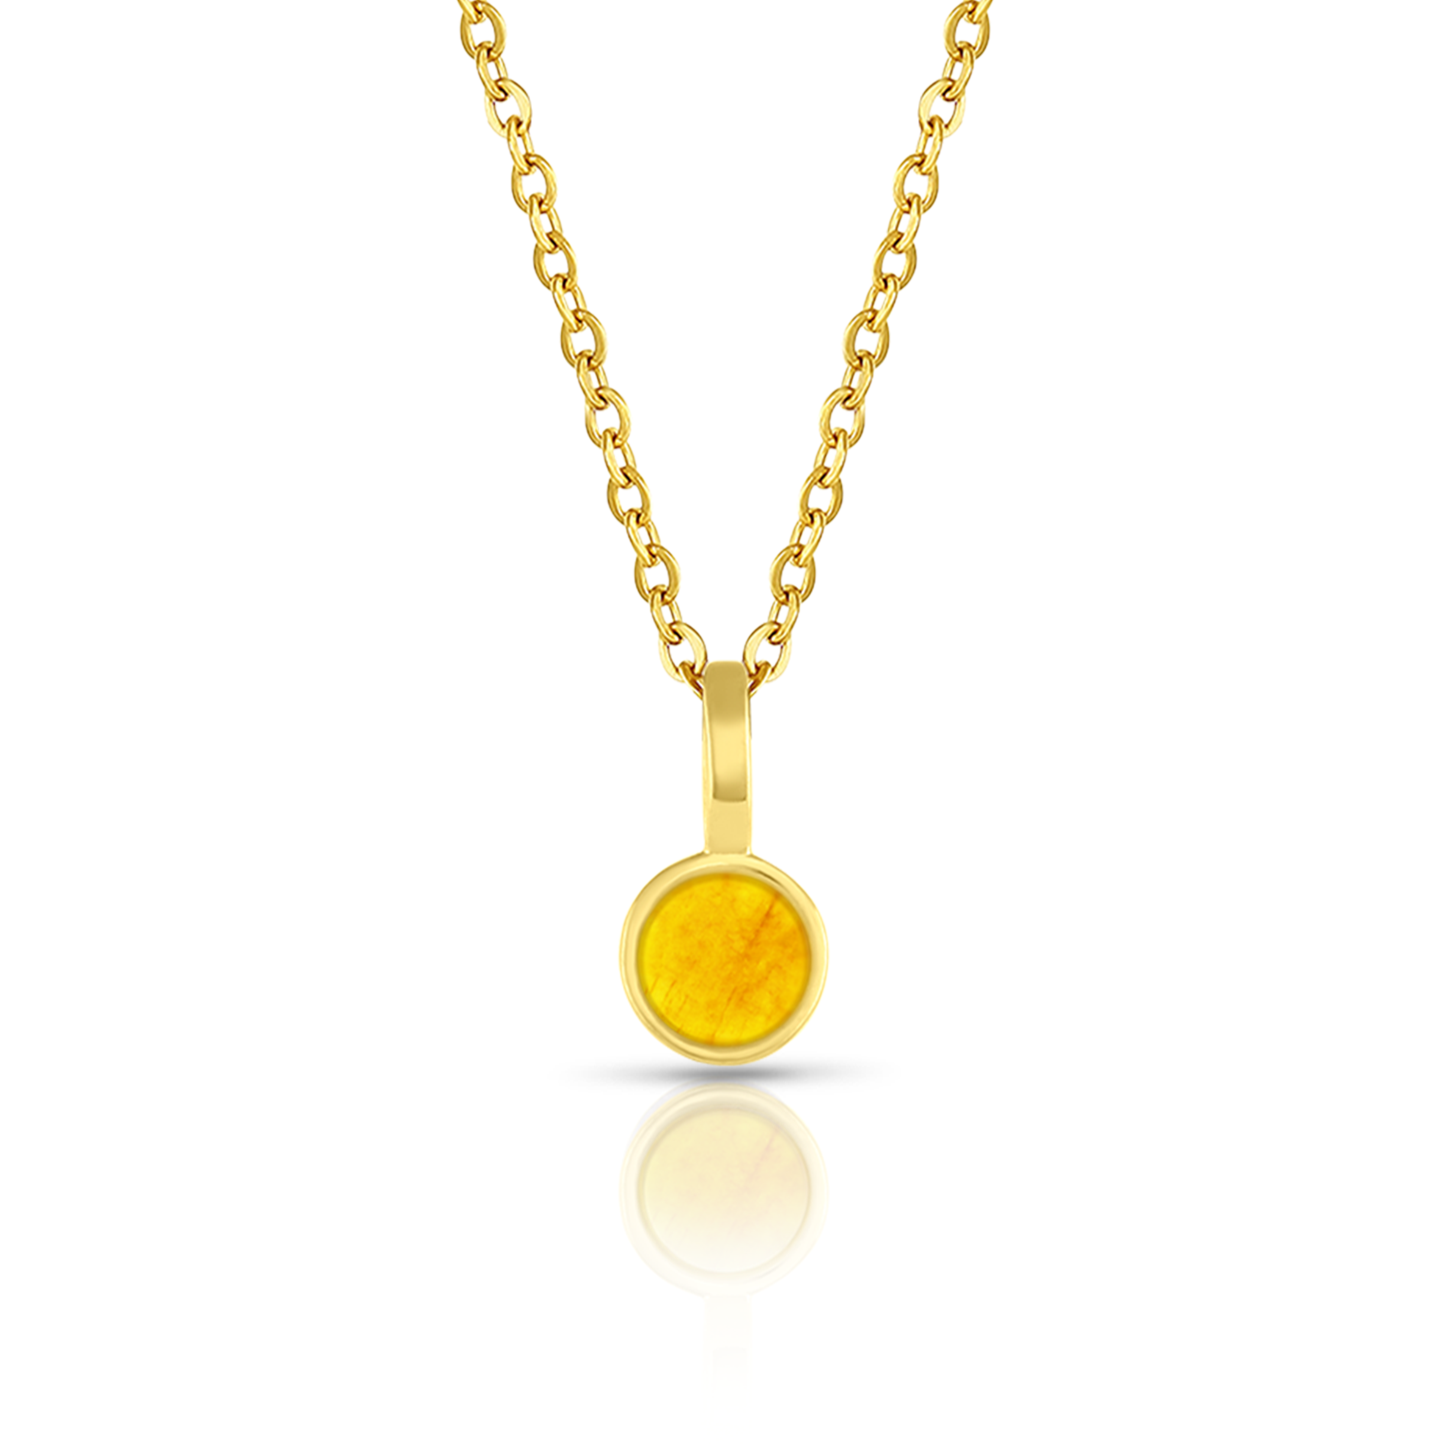 5mm Round Charm Yellow Gold plated Necklace in Yellow Round Natural Feldspar Gemstone made by Born to Rock Jewelry